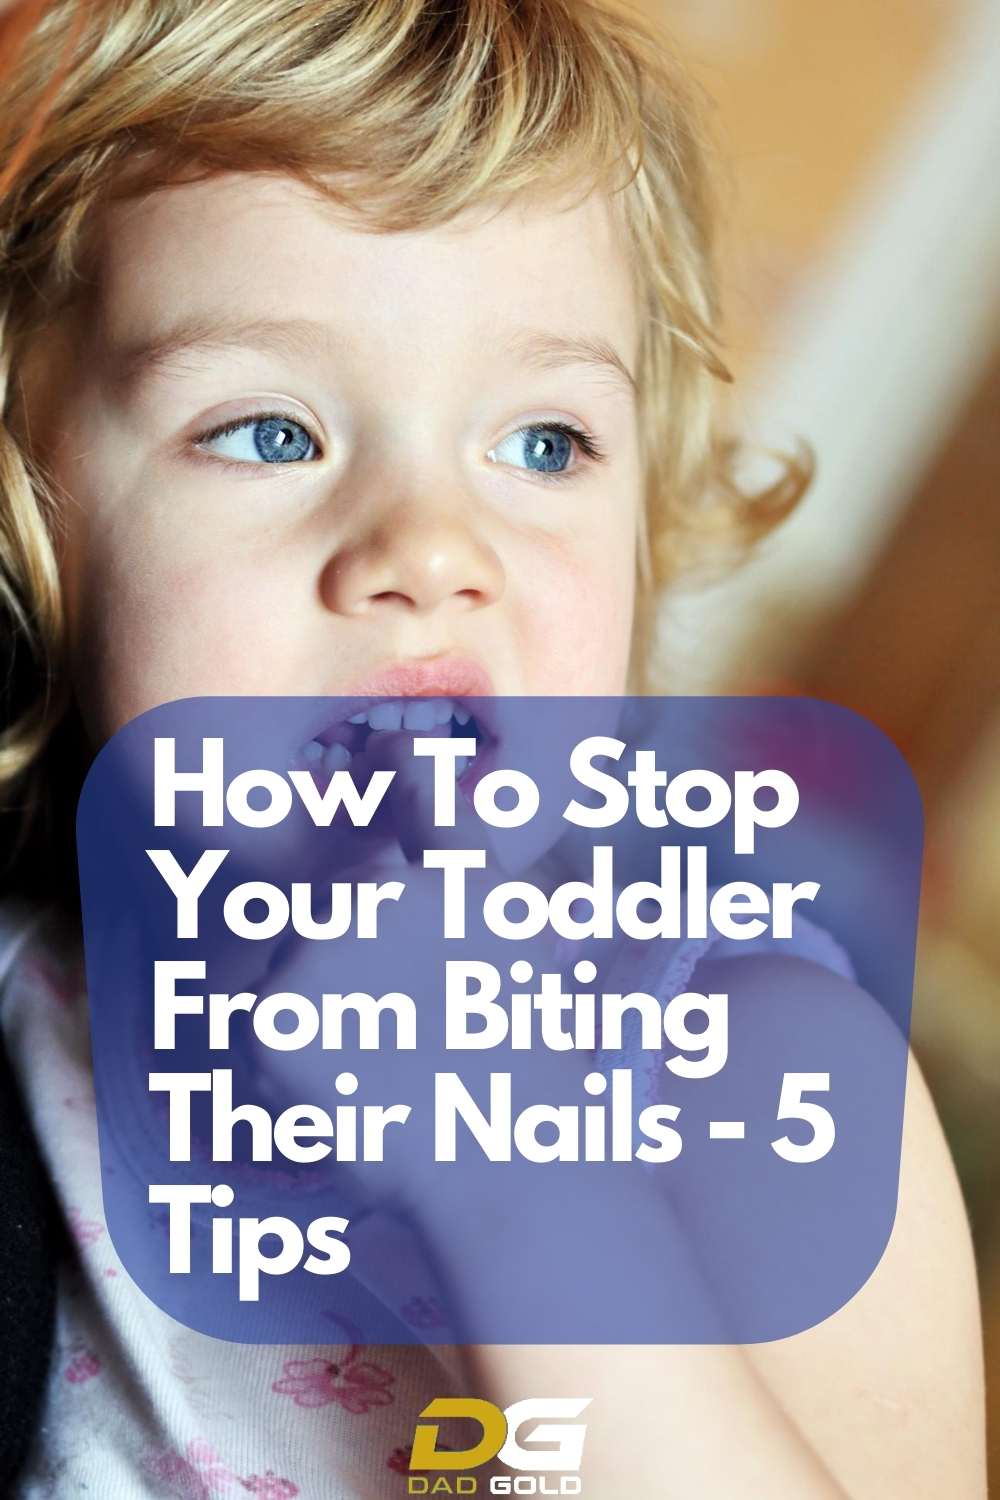 How To Stop Your Toddler From Biting Their Nails - 5 Tips - dadgold - parenting tips